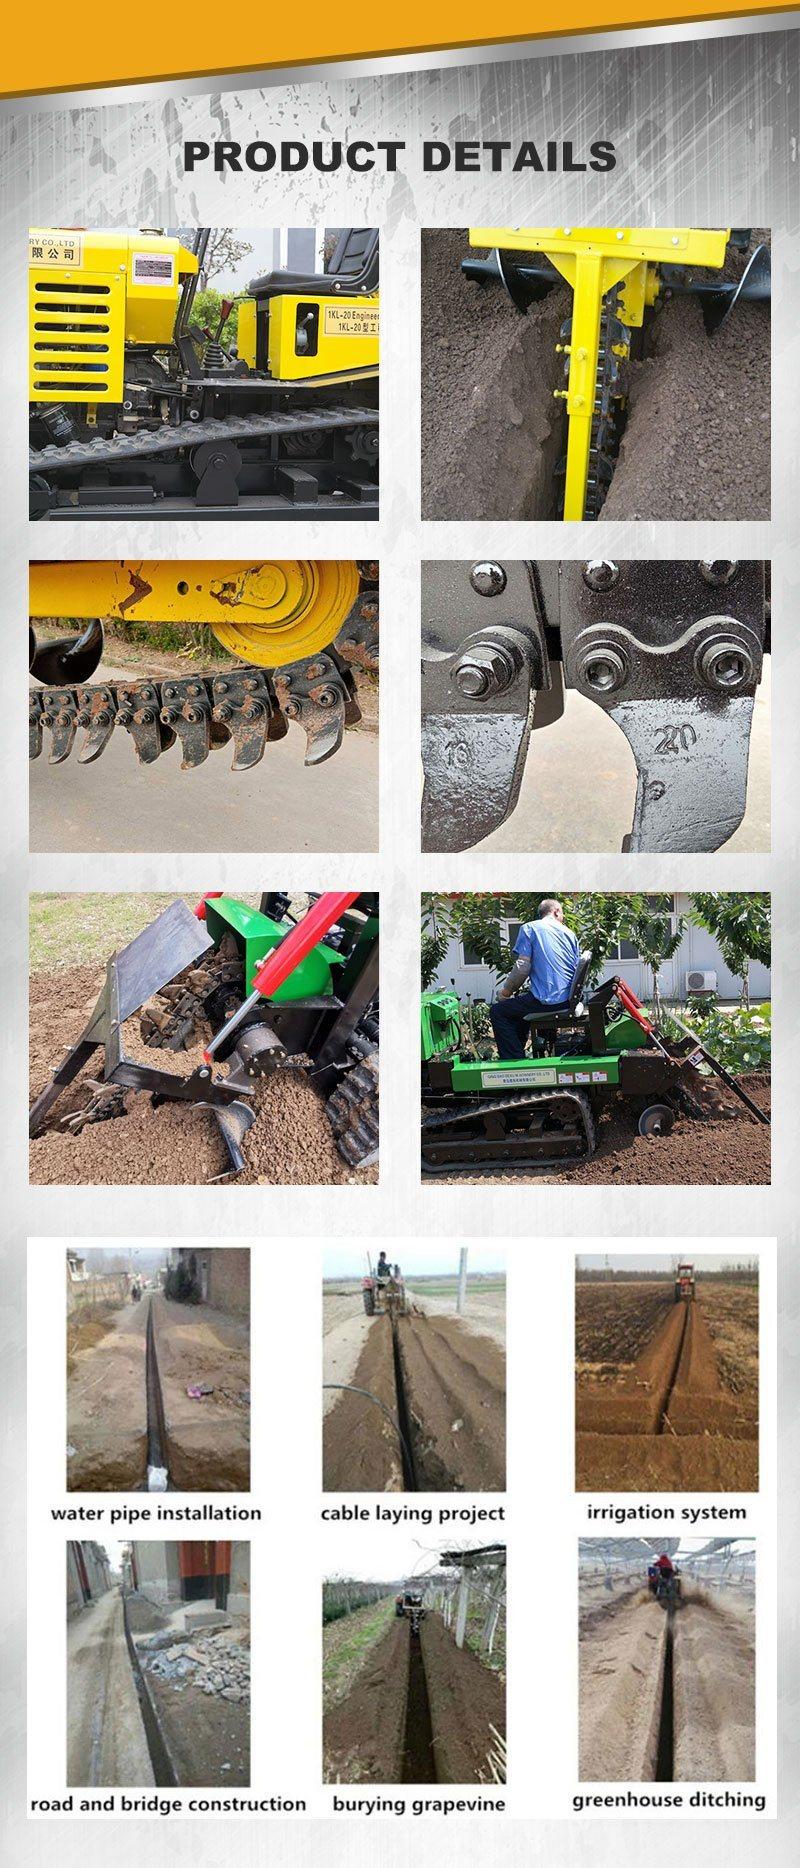 Wholesale for The Landscaper or Home Usage as It Has Smaller Trenching Applications Such as Sprinkler Systems